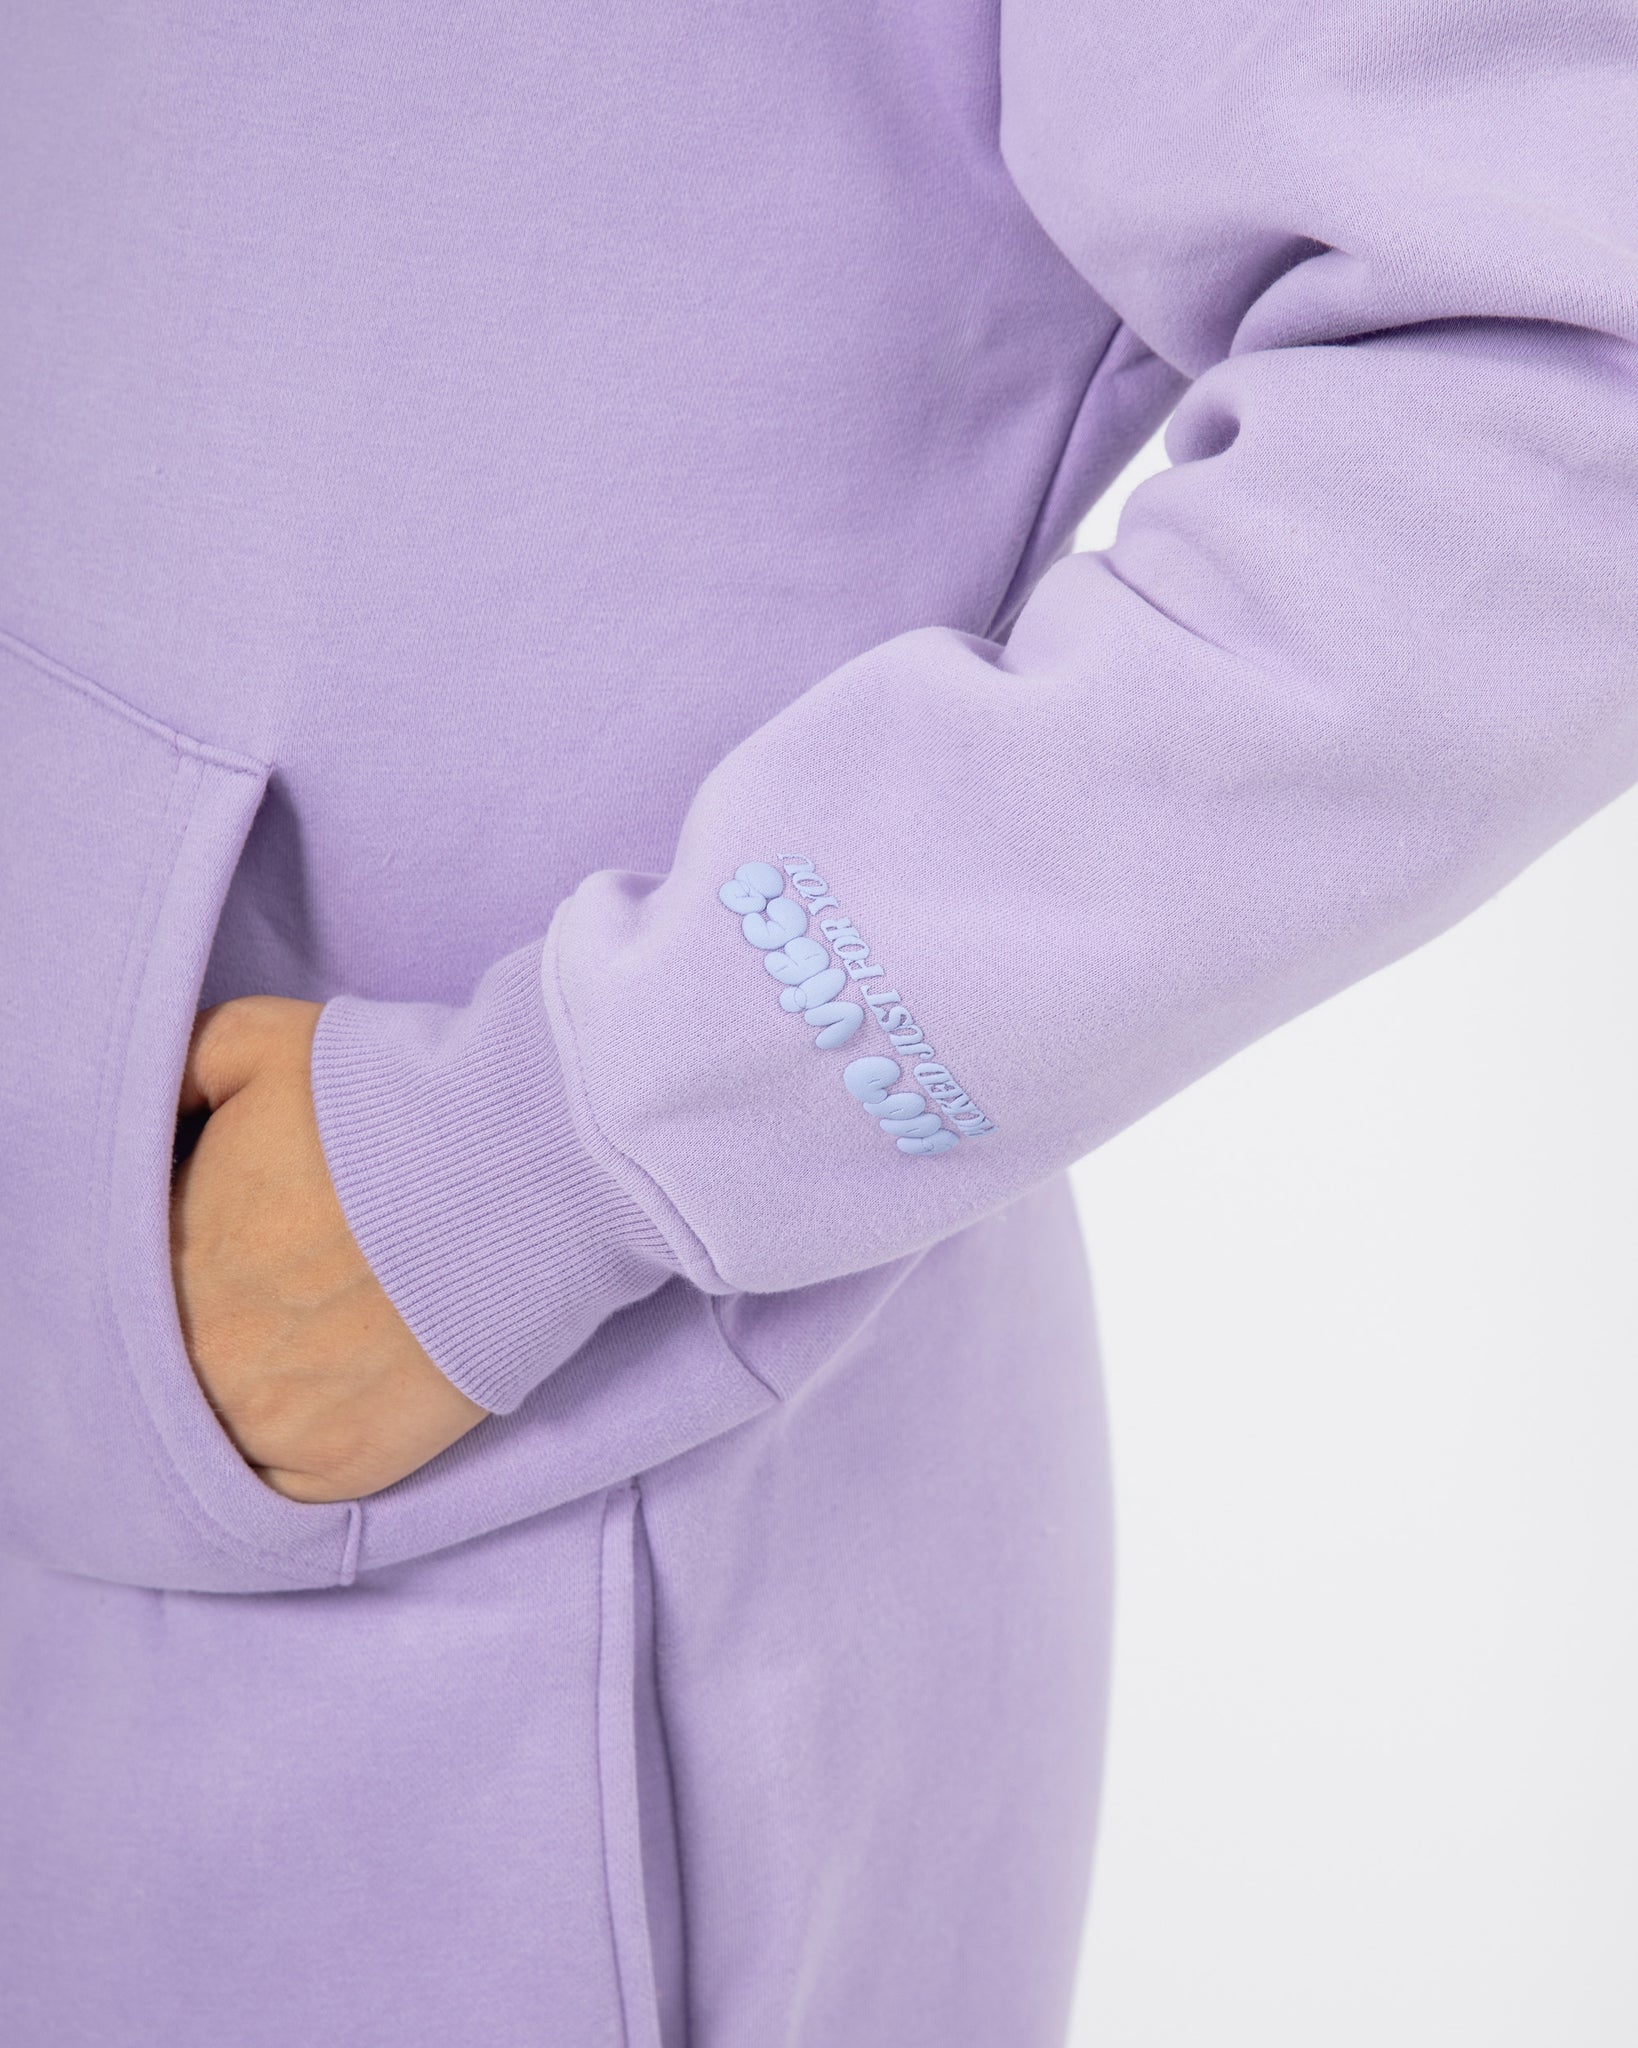 Picked For You Hoodie - Lavender